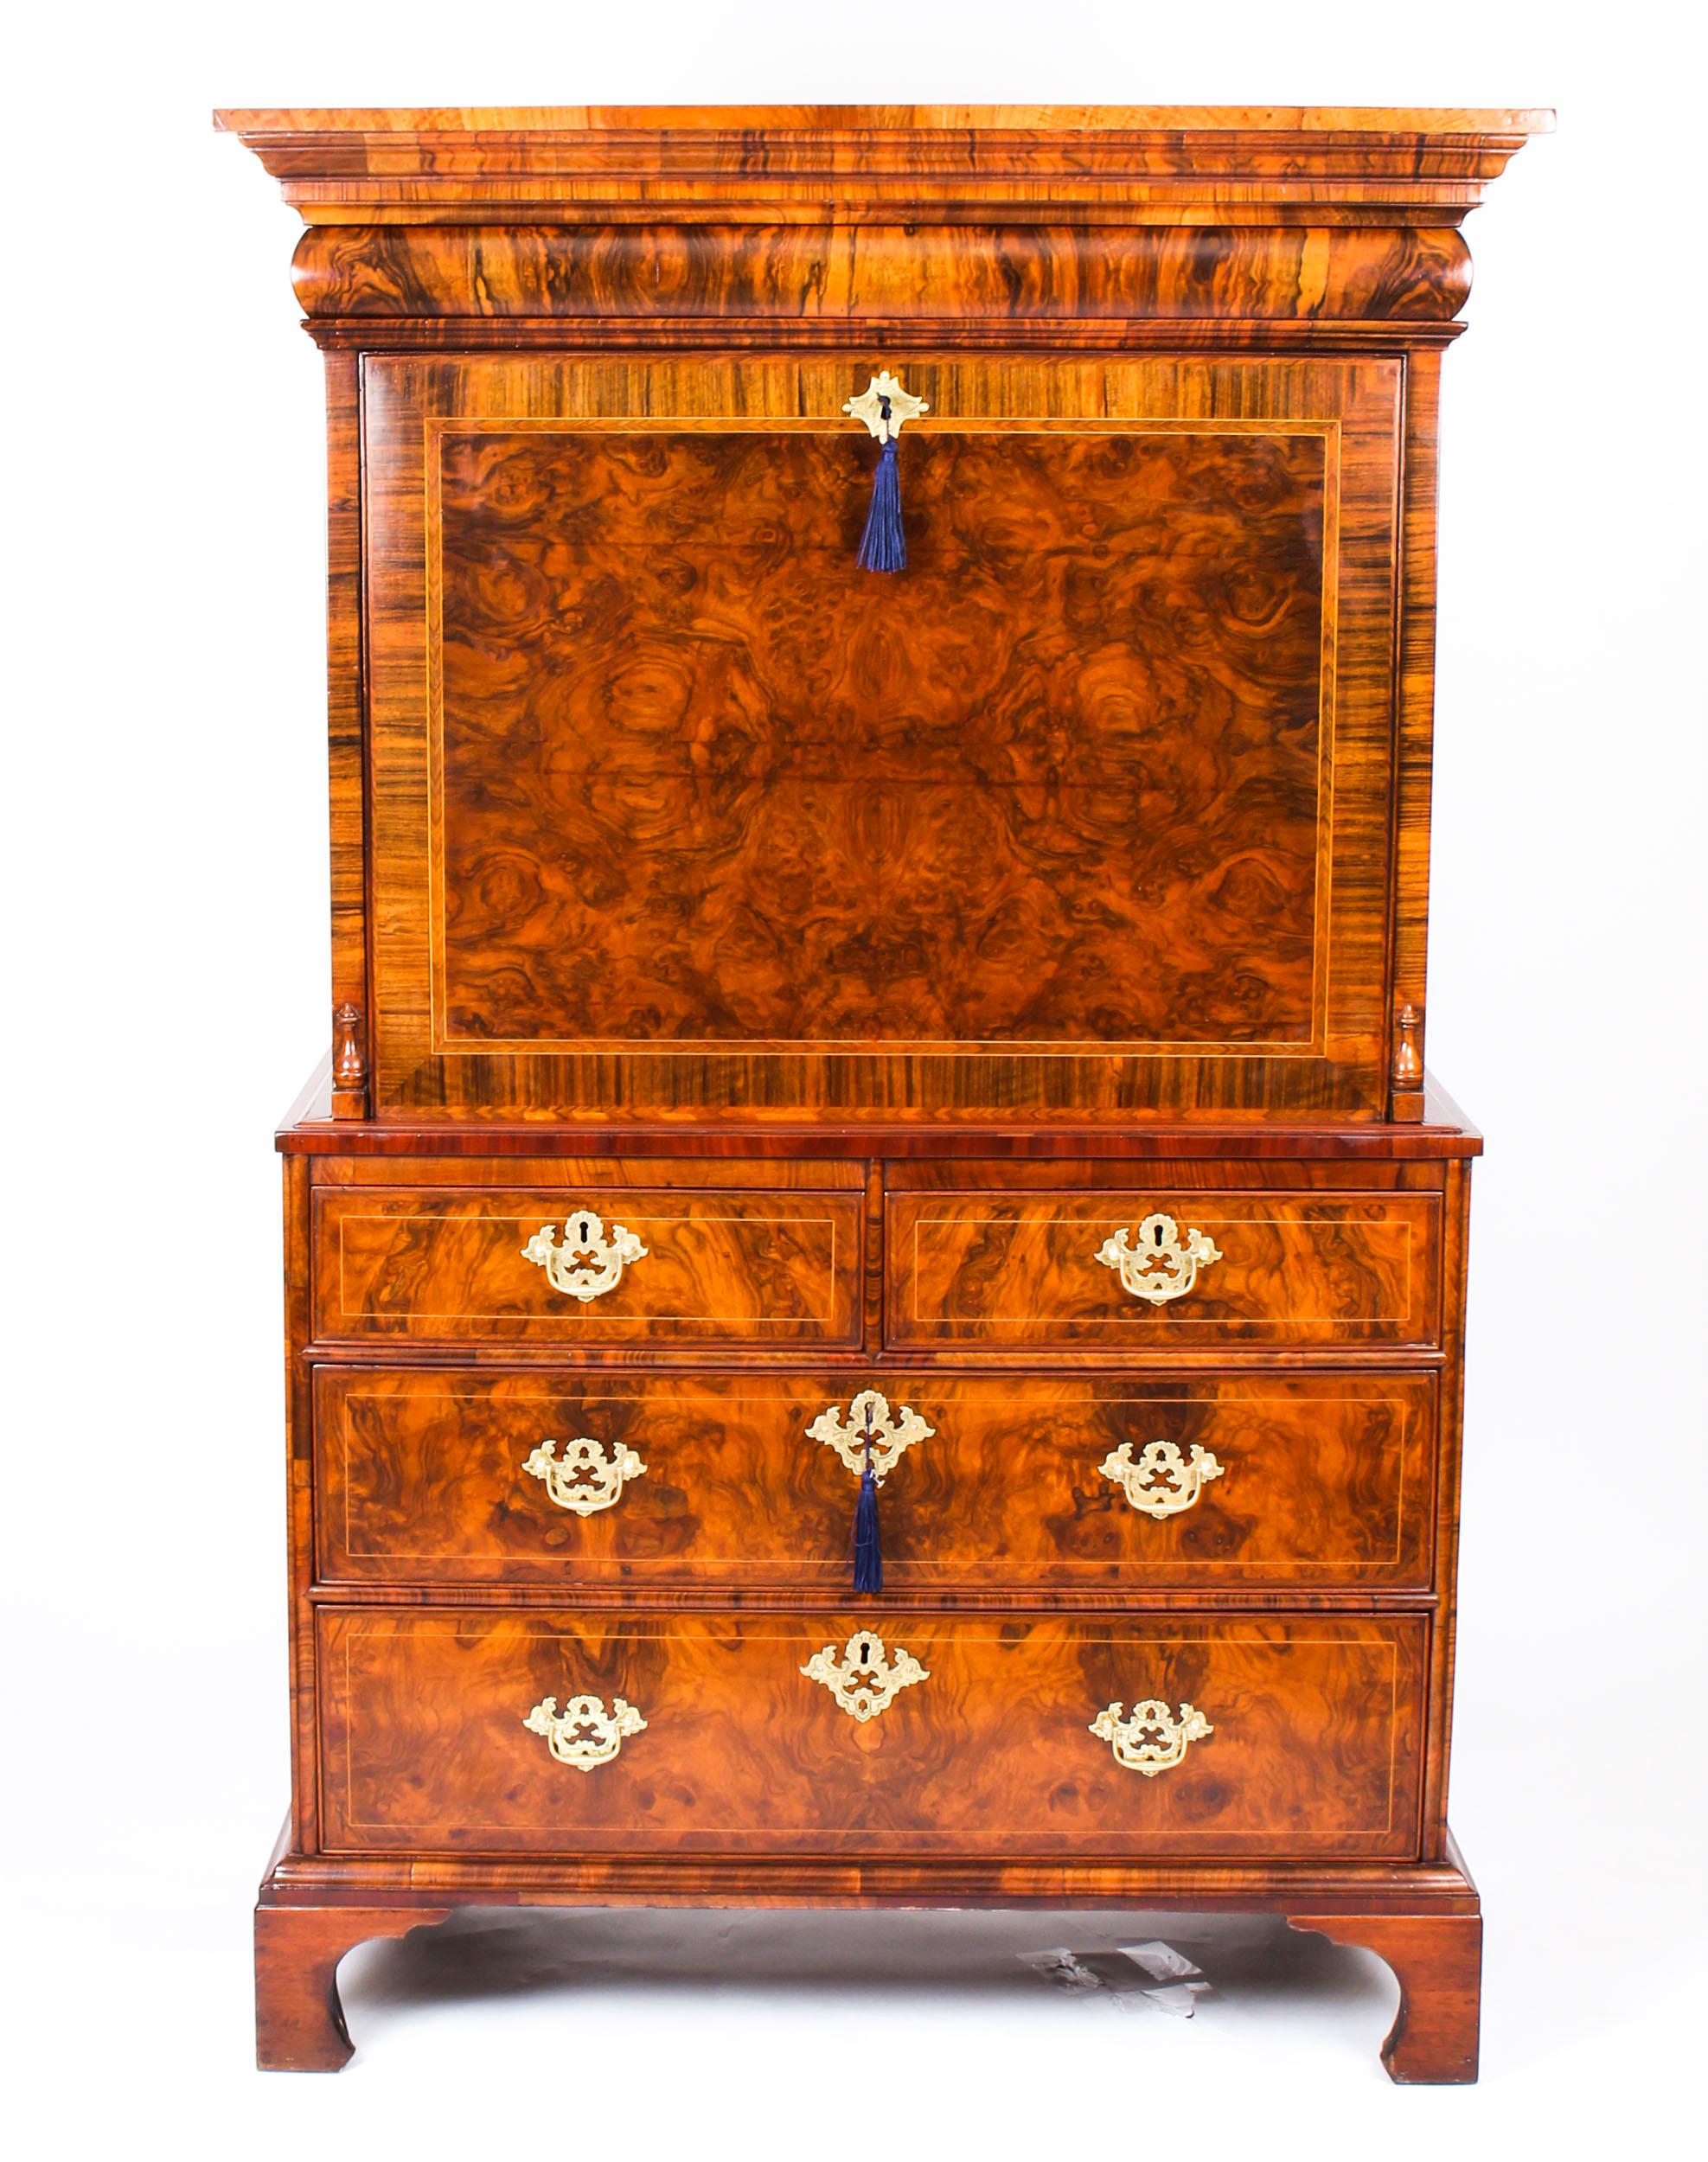 Dating from circa 1710, this very special piece of finely crafted furniture is an antique burr walnut Queen Anne secretaire chest / escritoire.
It has a secret cushion moulded drawer in the frieze and the fall front drops down to reveal an inset